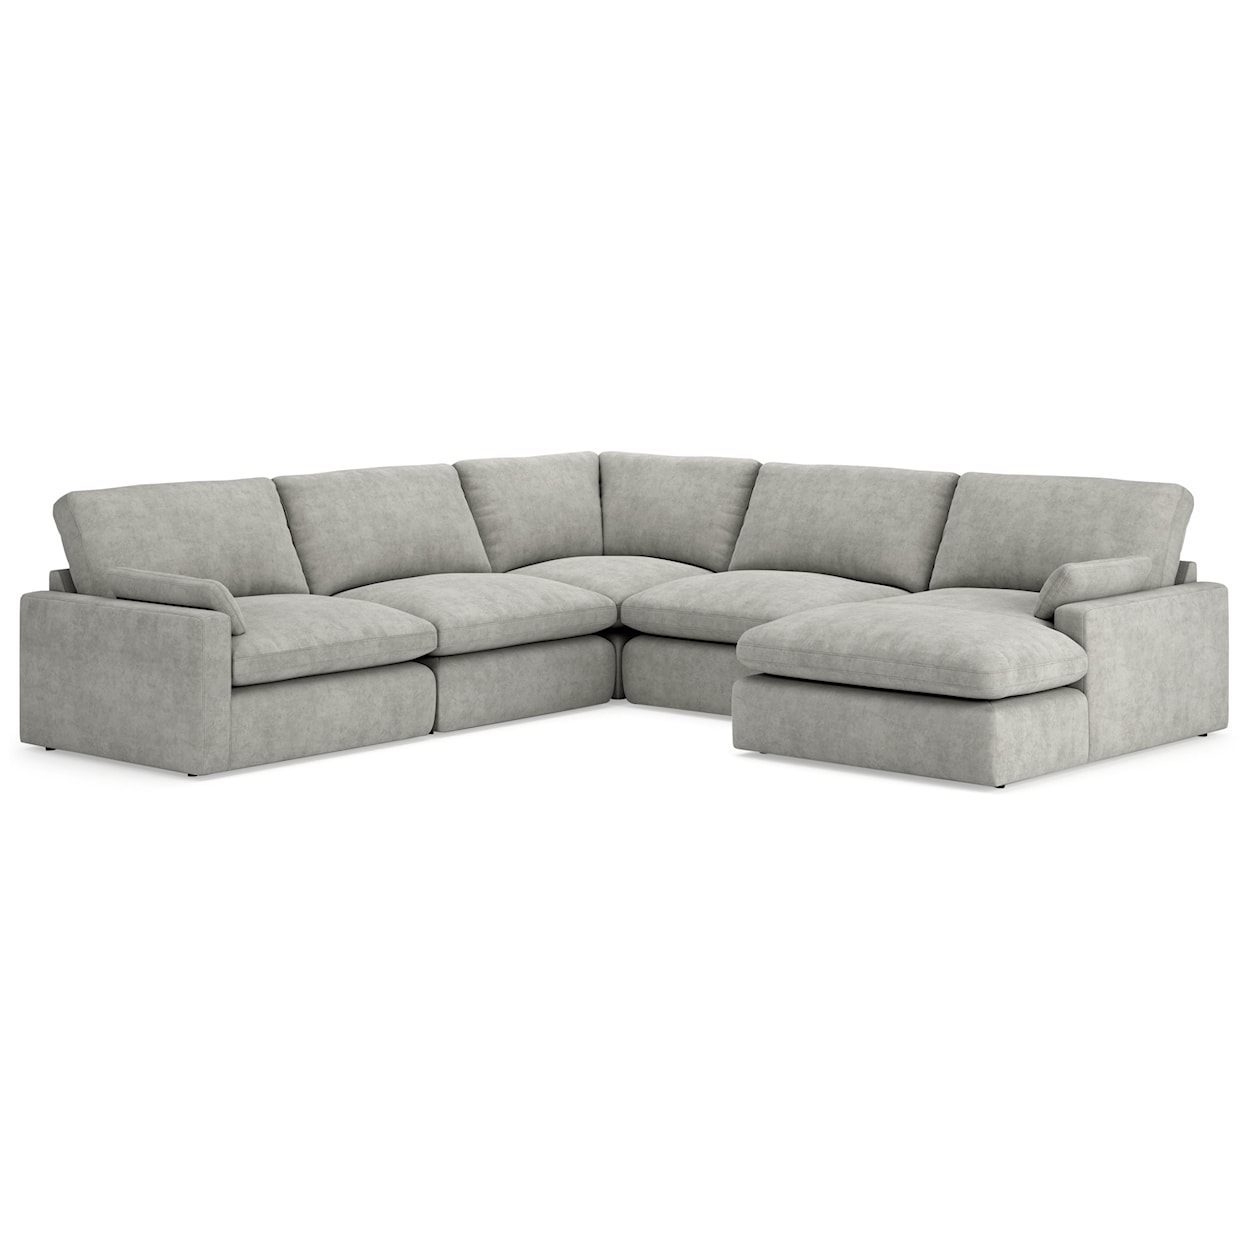 Benchcraft Sophie 5-Piece Sectional with Chaise